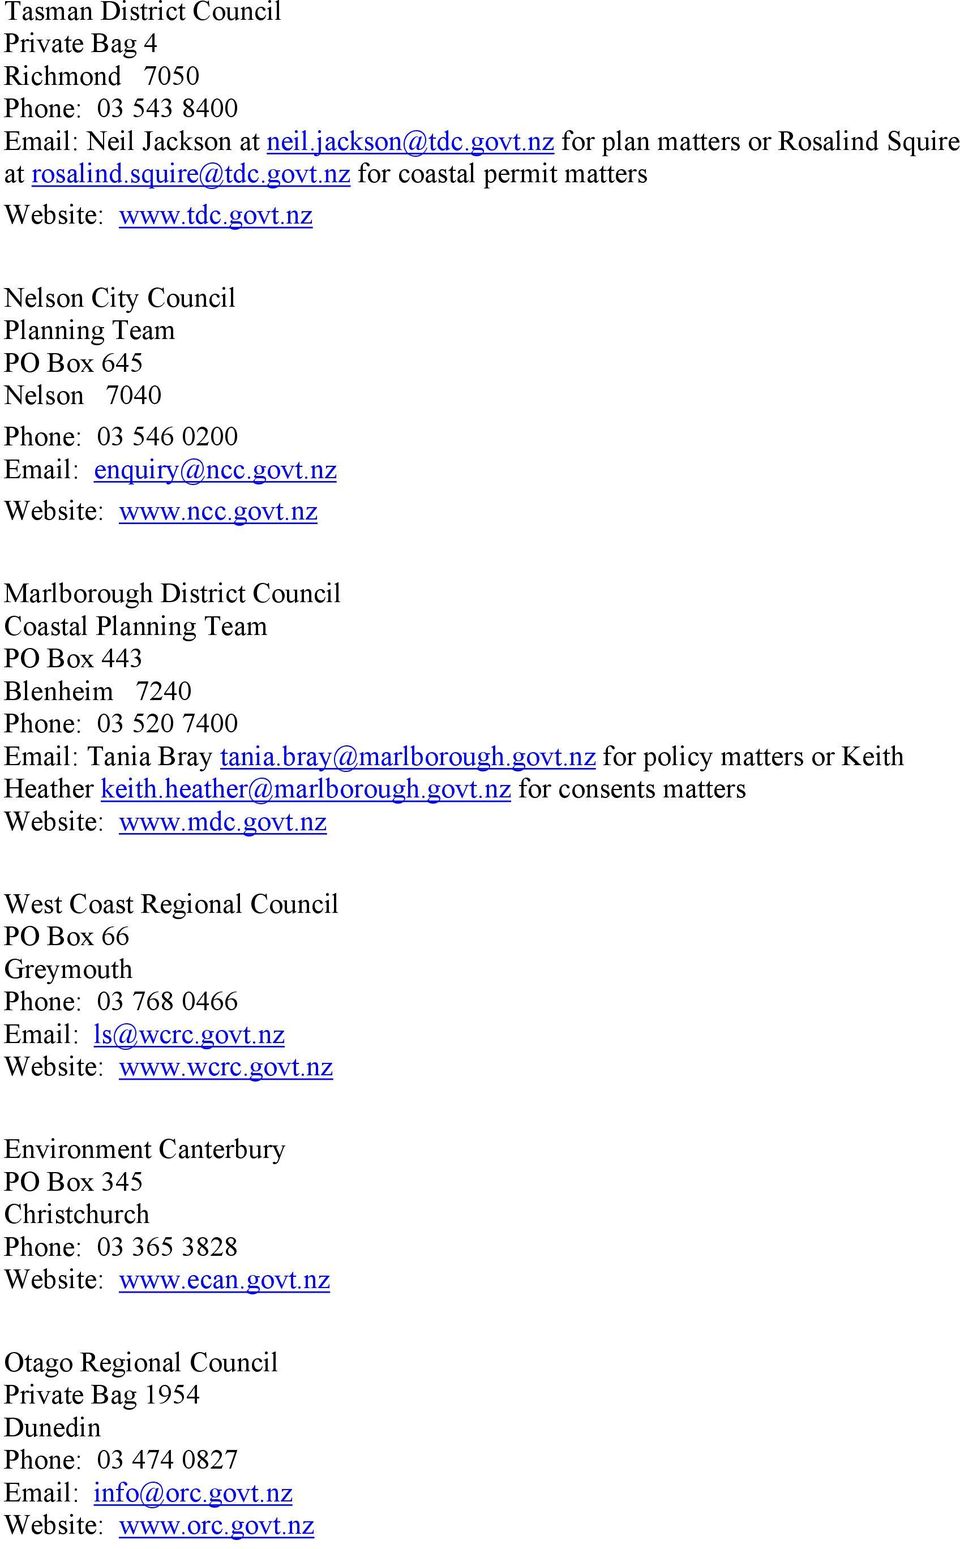 bray@marlborough.govt.nz for policy matters or Keith Heather keith.heather@marlborough.govt.nz for consents matters Website: www.mdc.govt.nz West Coast Regional Council PO Box 66 Greymouth Phone: 03 768 0466 Email: ls@wcrc.